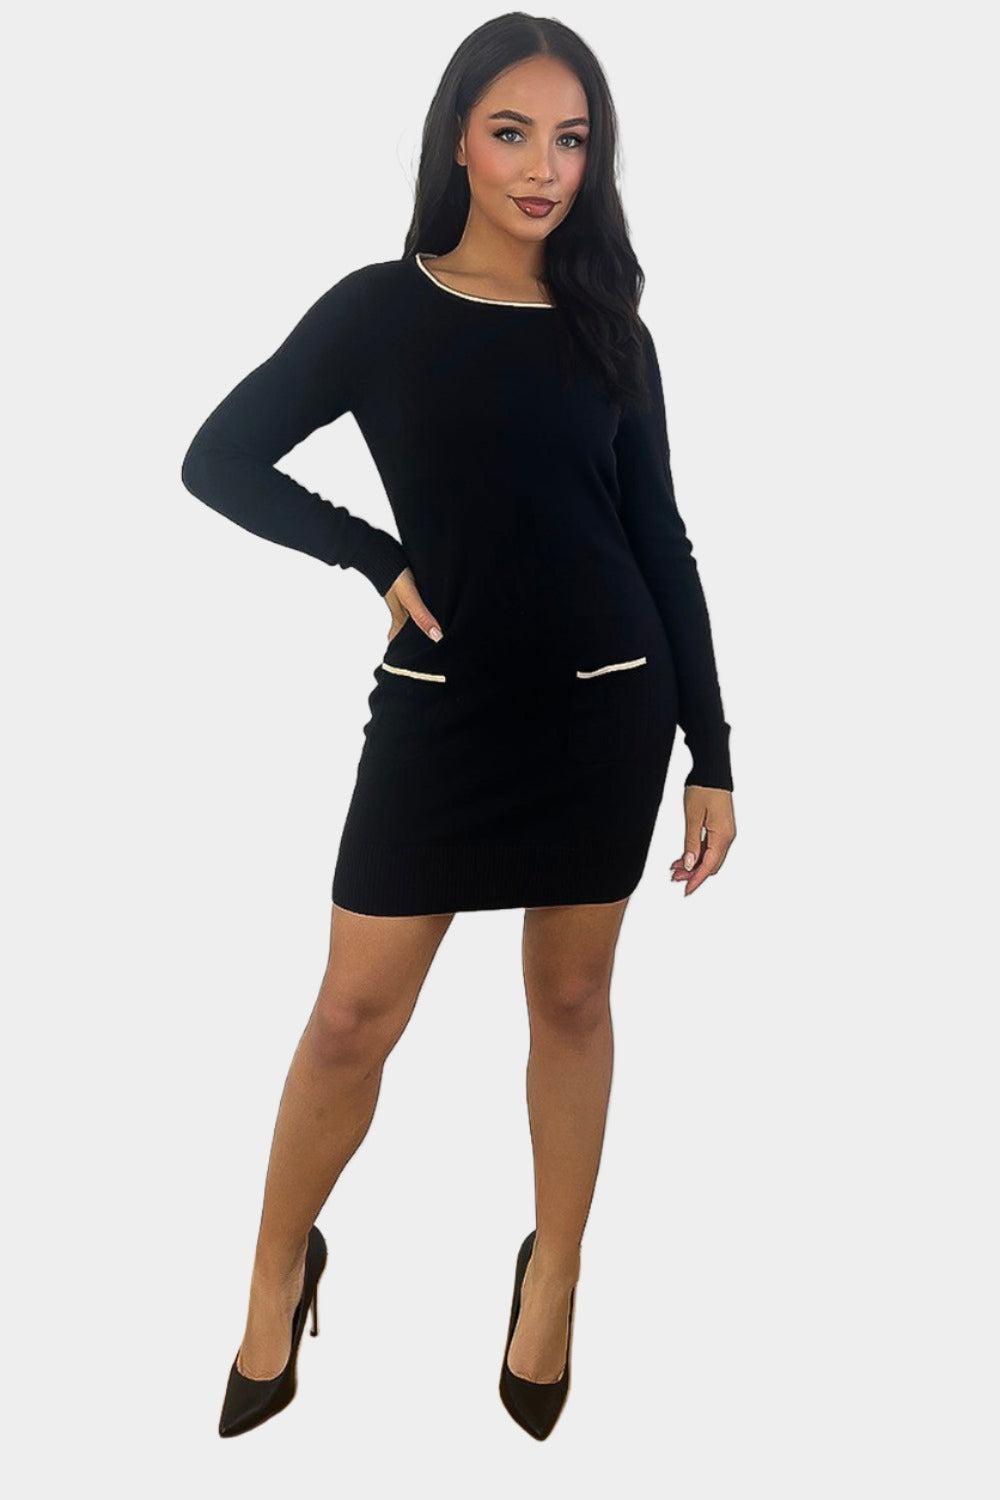 Contrast Details Bodycon Knitted Dress-SinglePrice